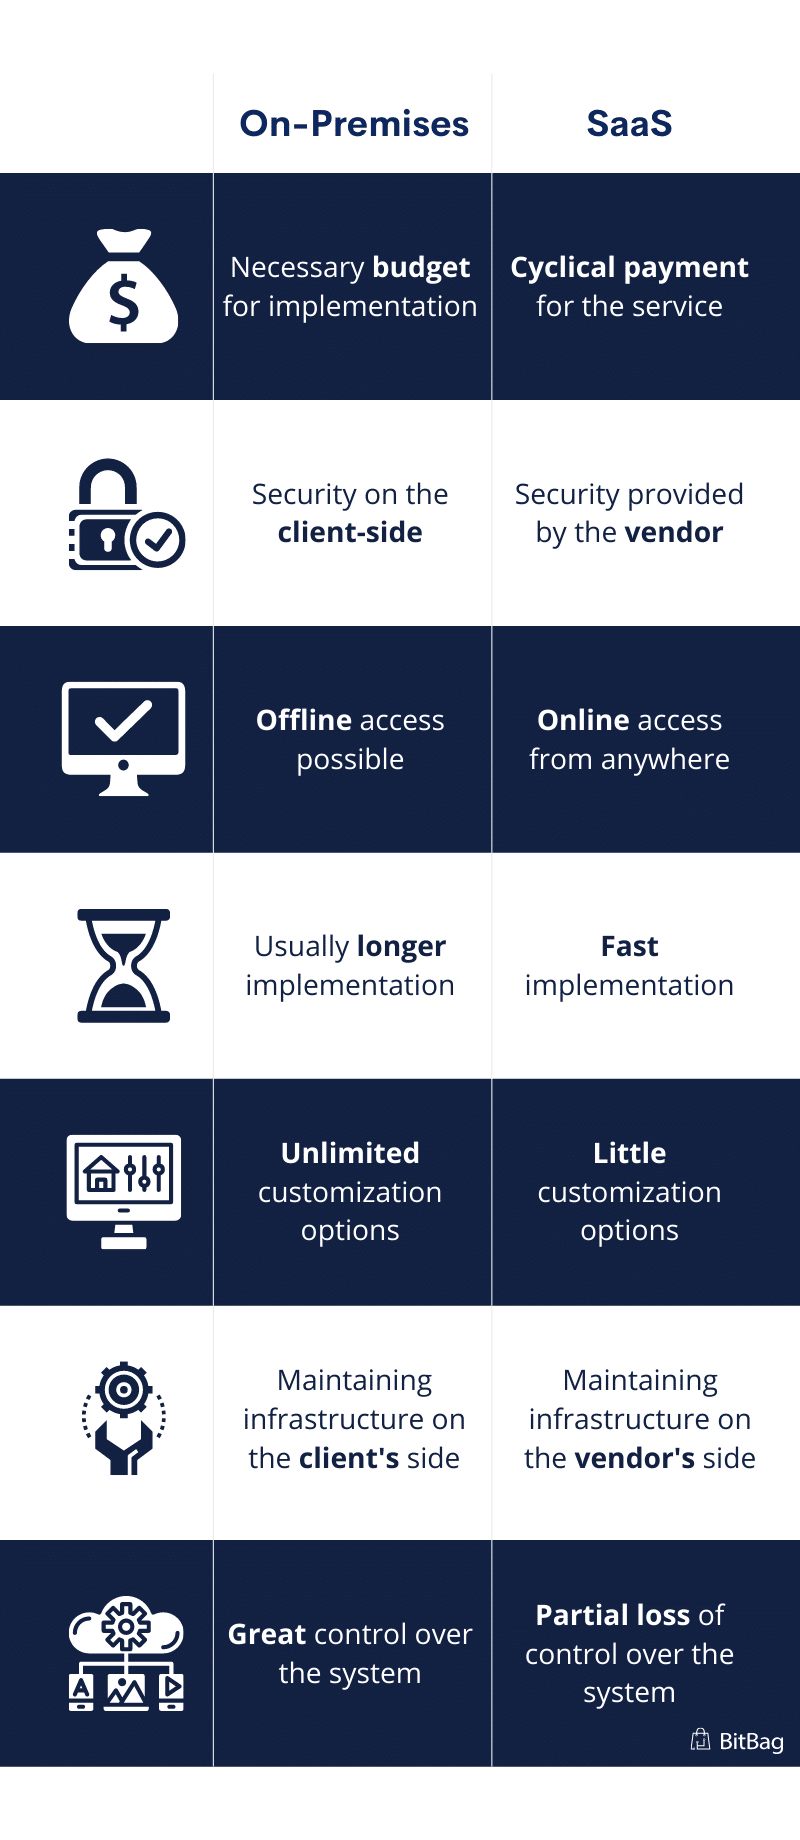 SaaS vs on-premise pros and cons infographic